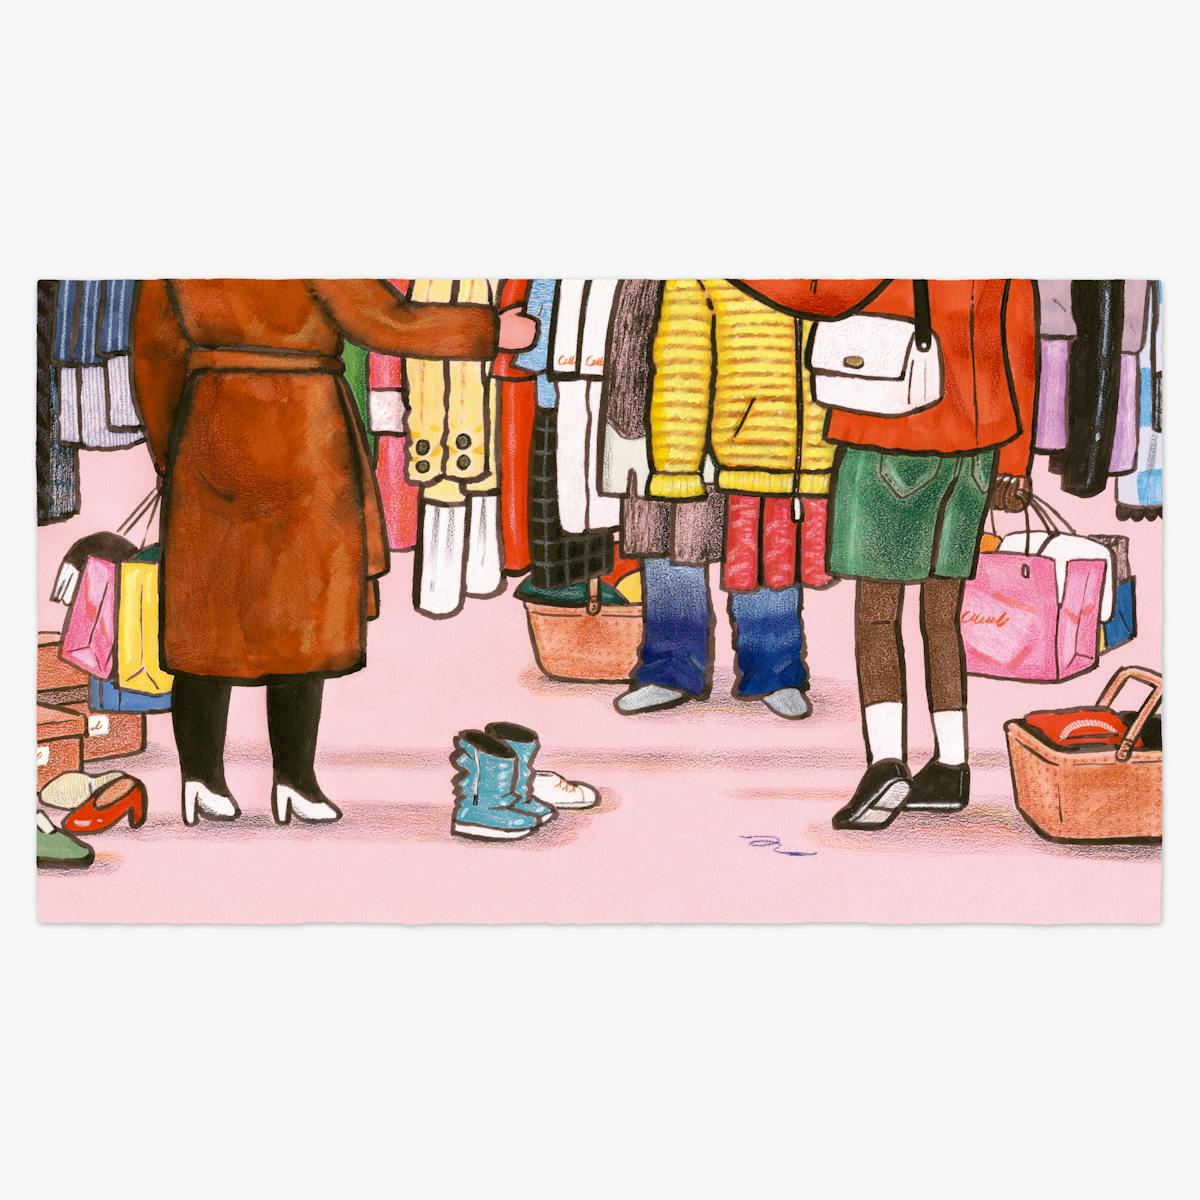 Colour hand drawn artwork showing a clothing market scene. Several people are depicted from the shoulders down, excluding their faces. The people who are carrying shopping bags, are browsing clothing which is hanging from a rail. On the floor are several pairs of shoes and bags and boxes.